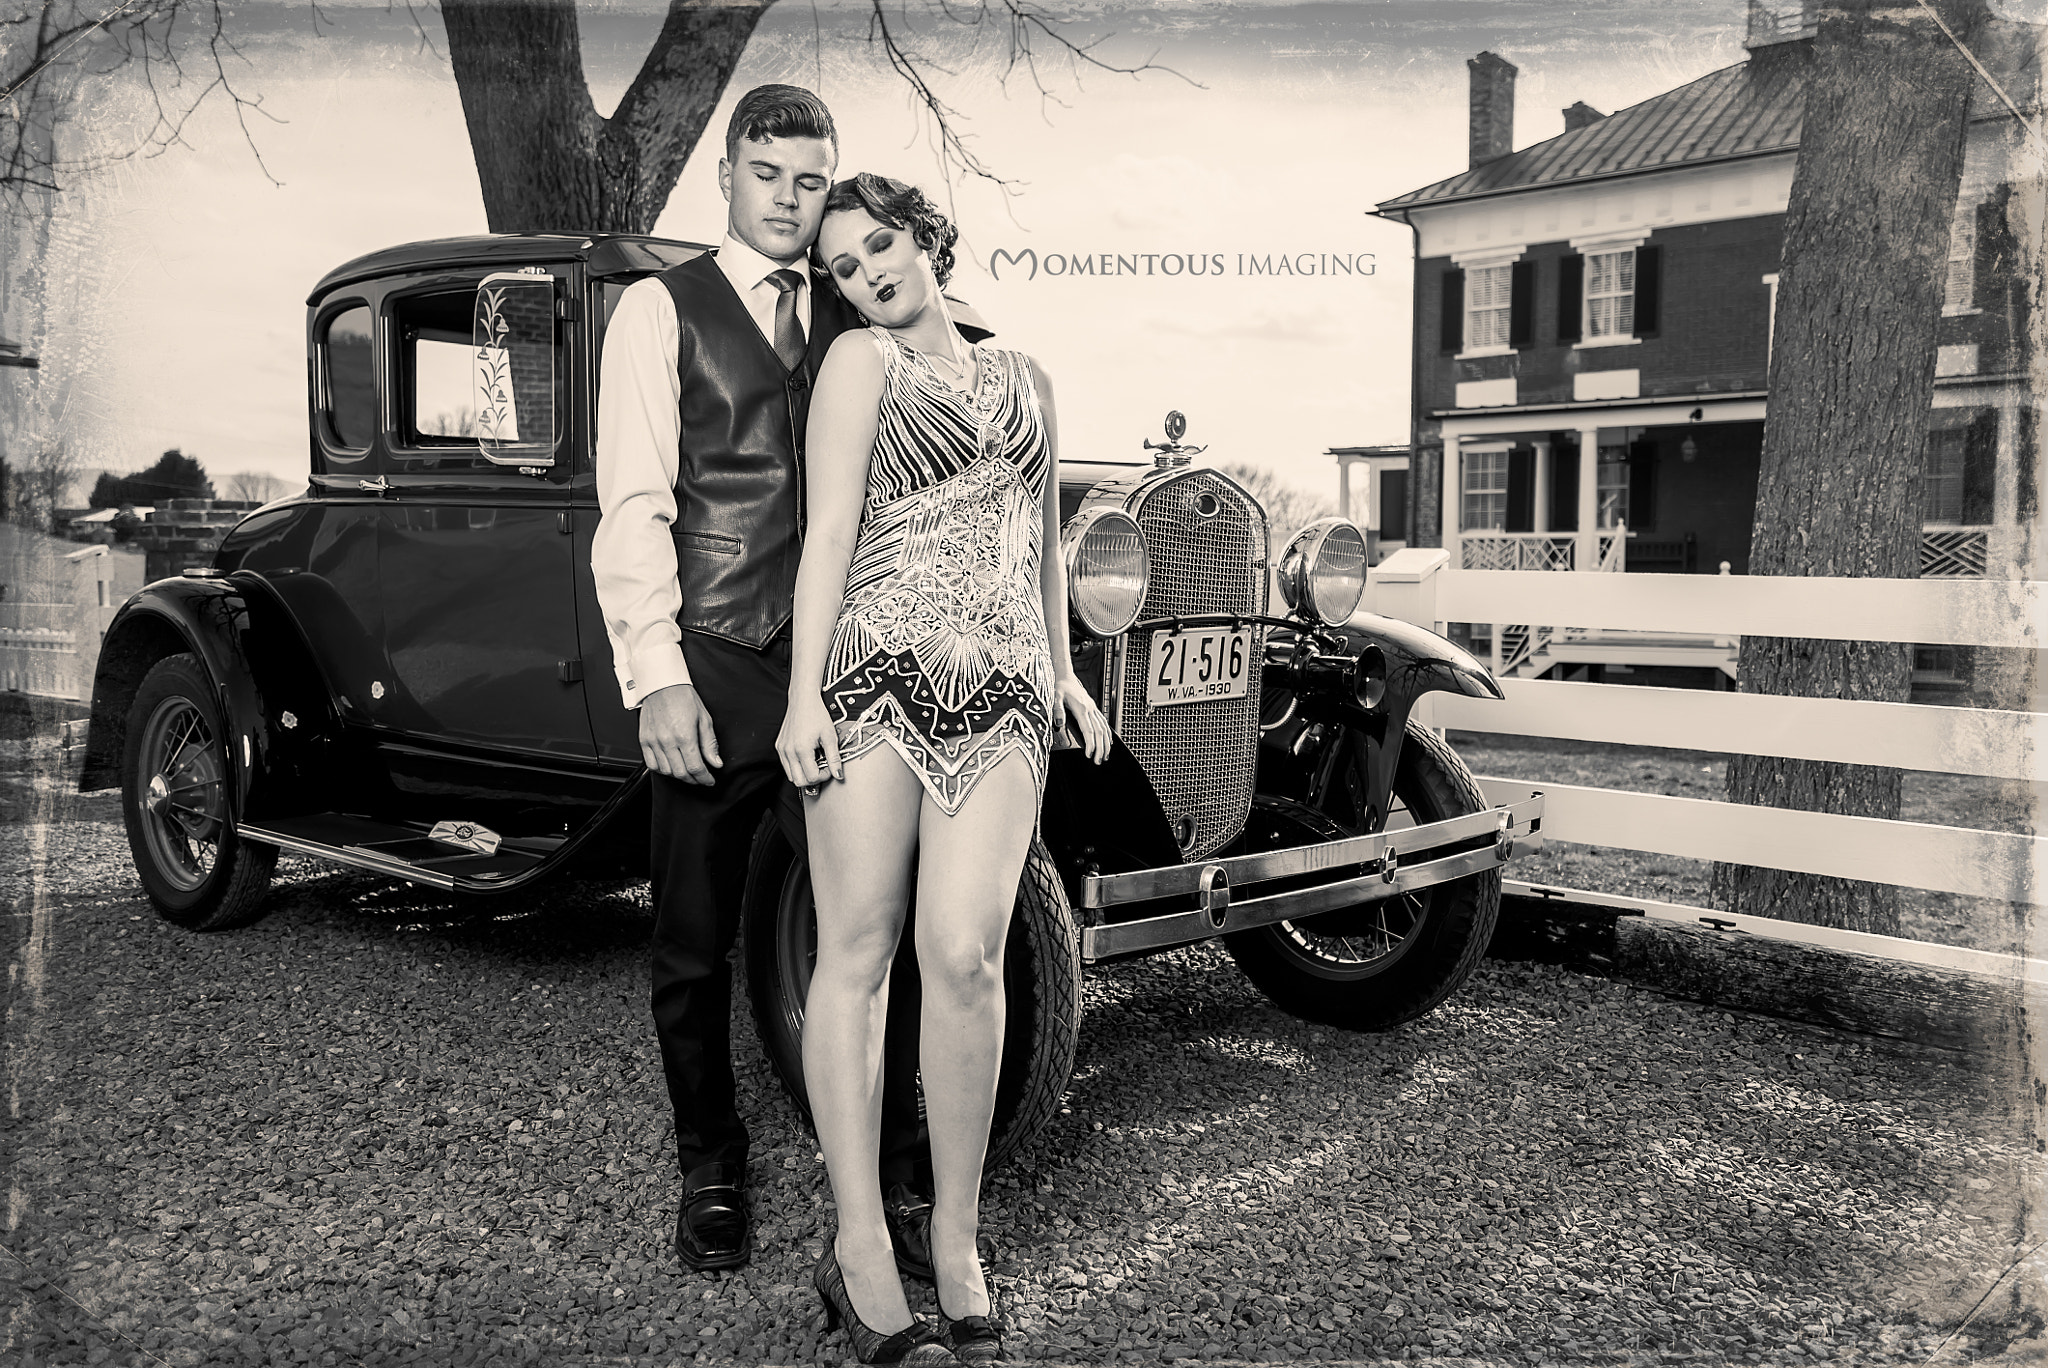 Sony a7S II sample photo. The bootlegger and his lady photography